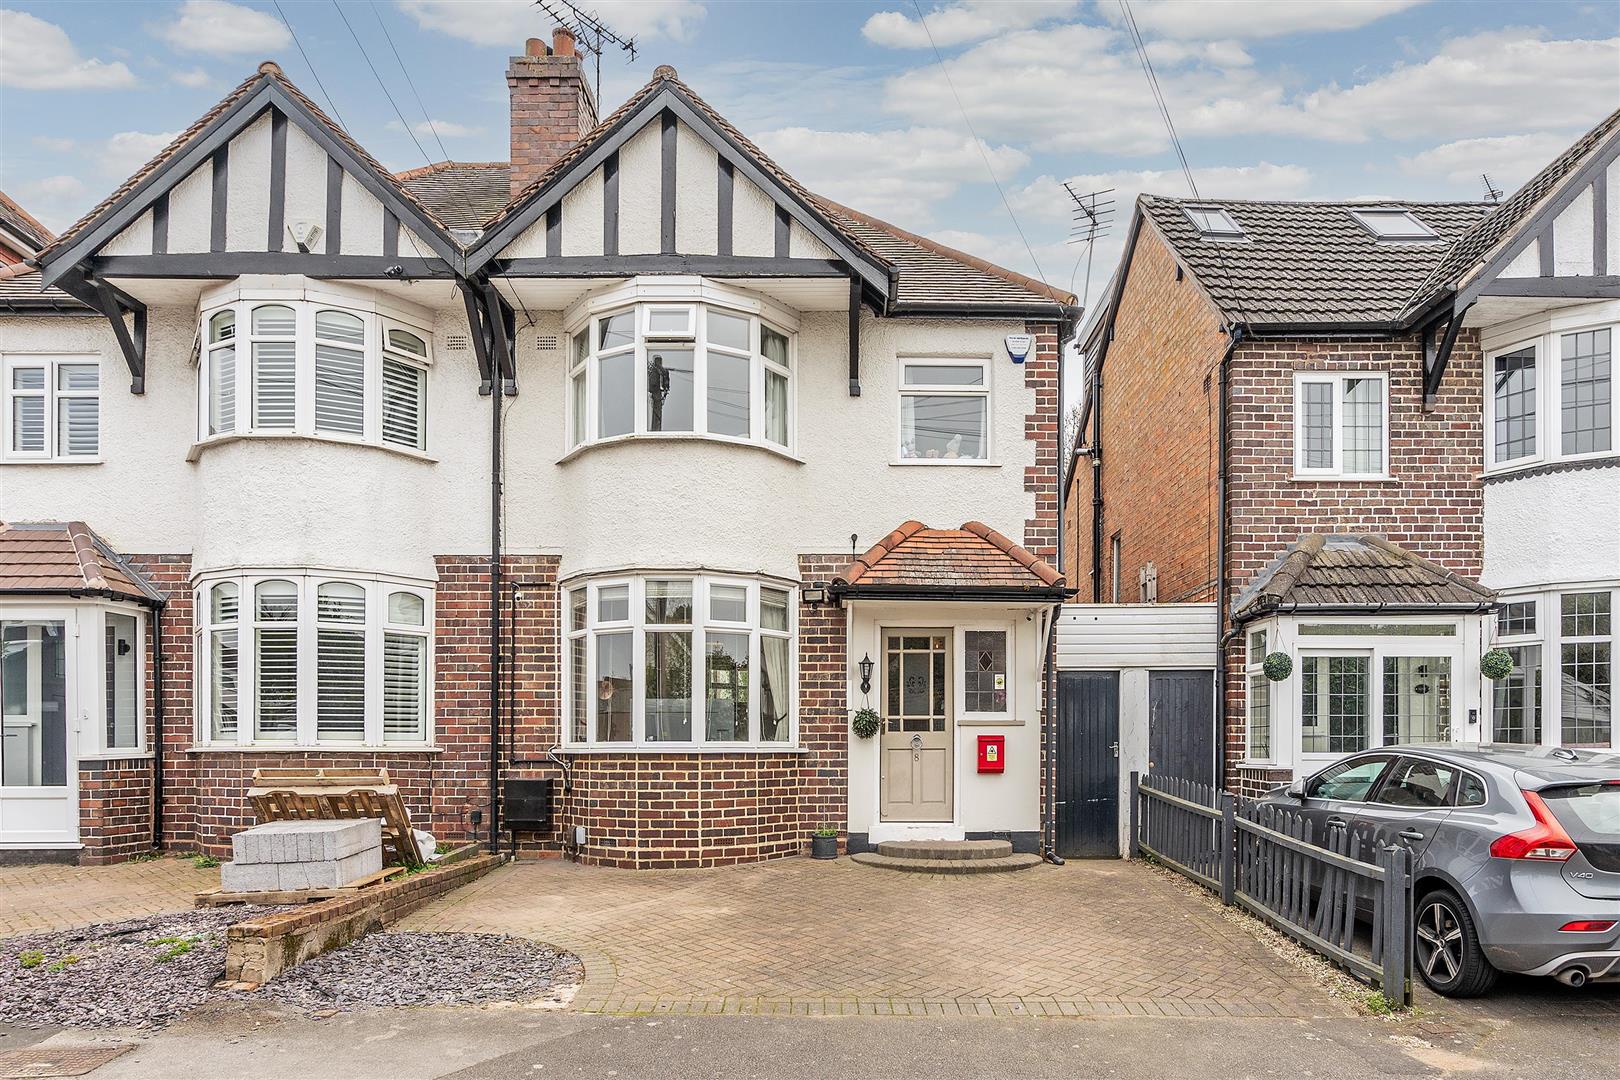 3 bed  for sale in The Crescent, Solihull, B90 